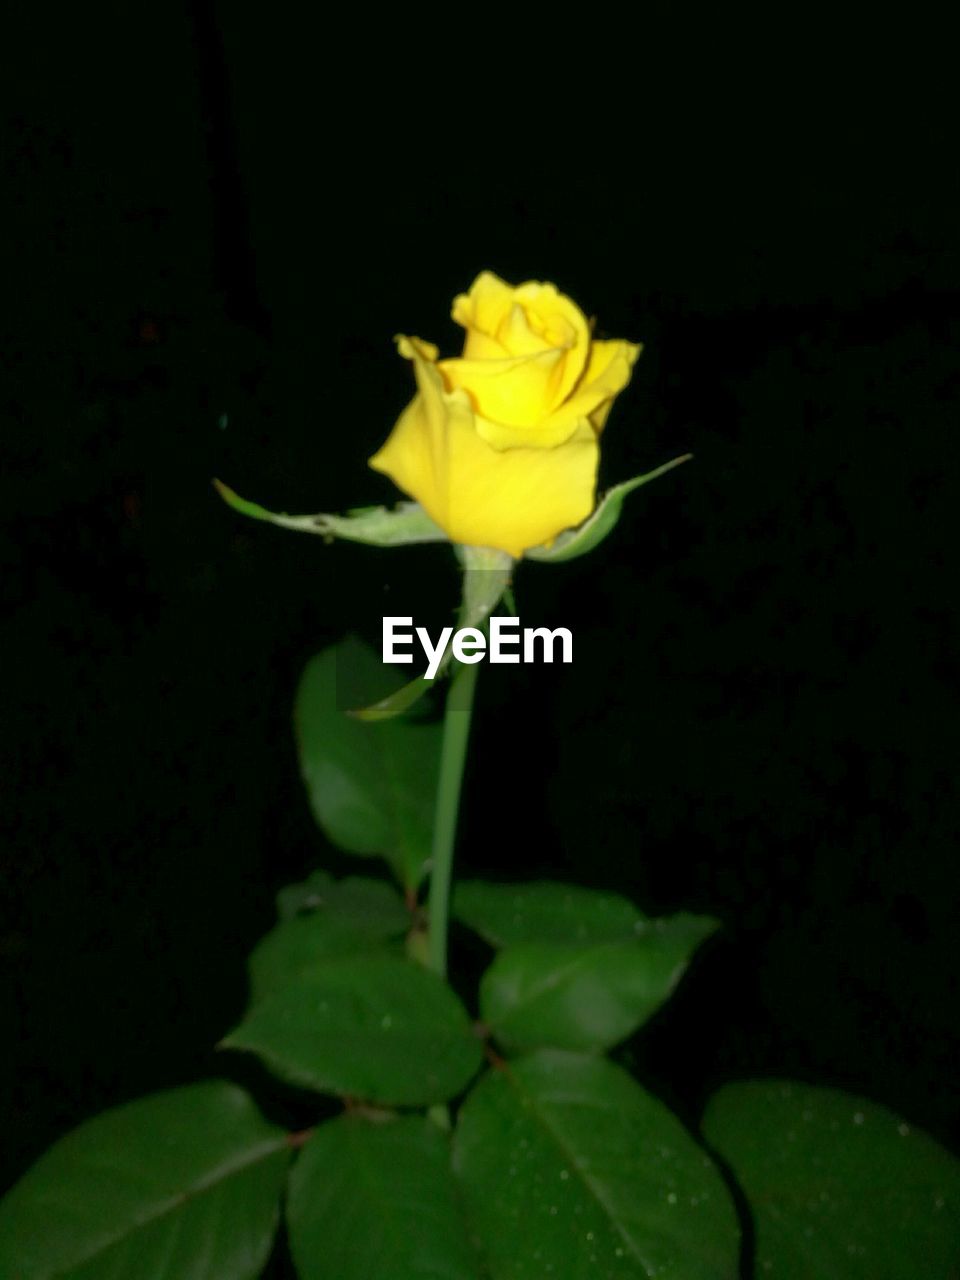 CLOSE-UP OF YELLOW FLOWER AGAINST BLACK BACKGROUND